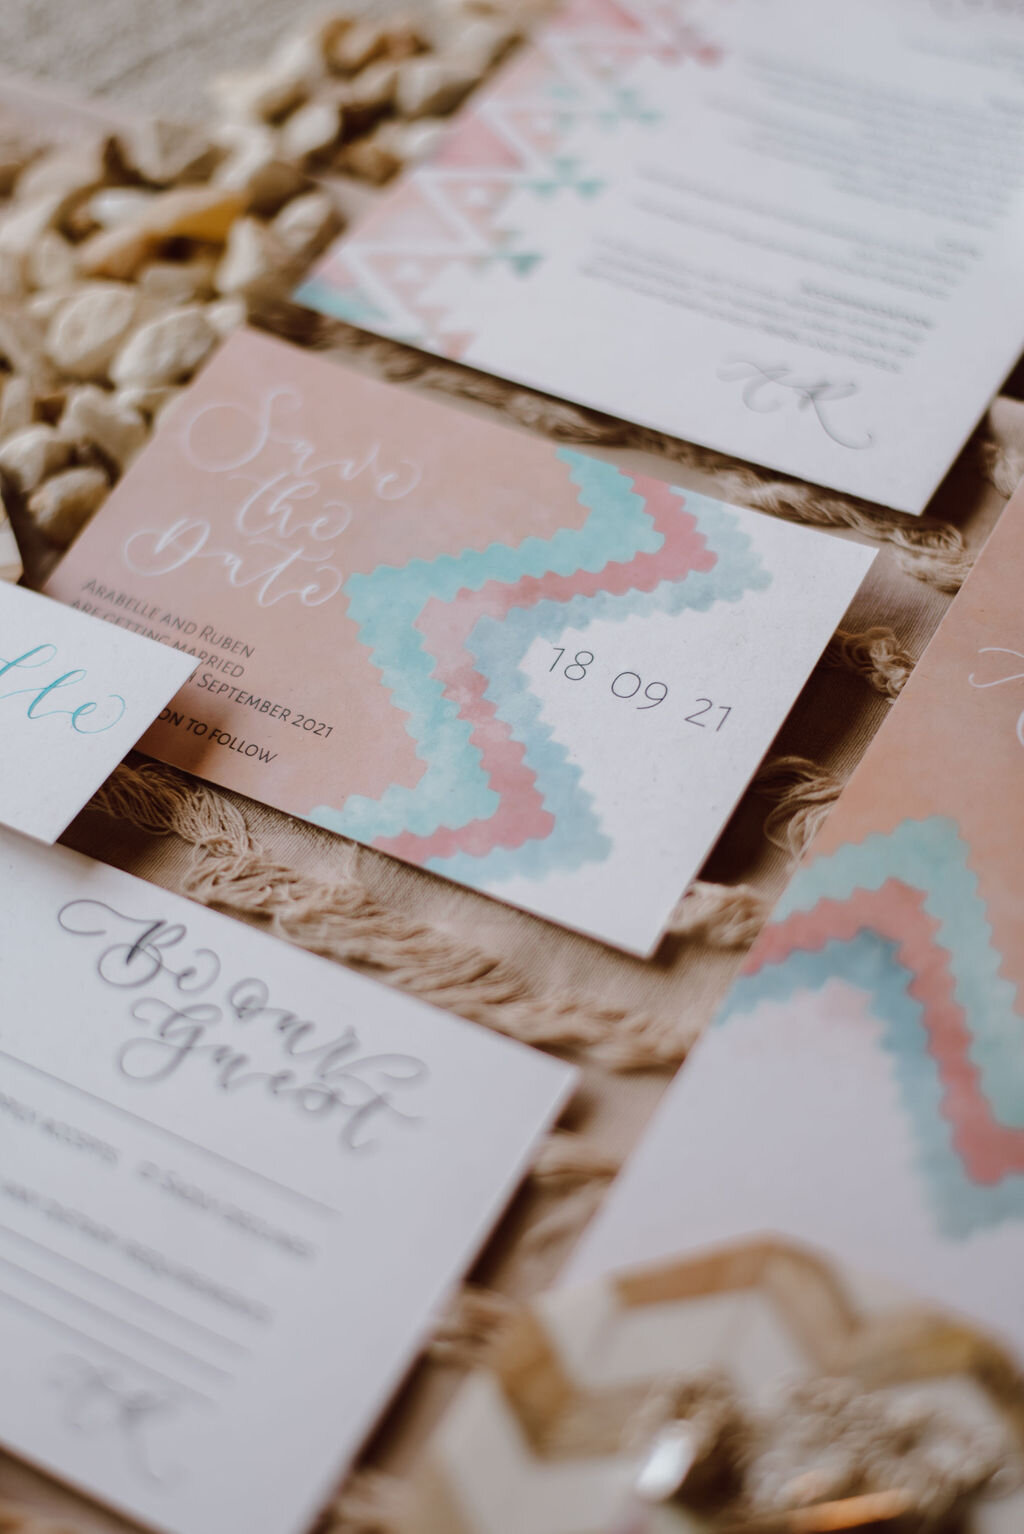 Nojavo desert stationery suite with teal, nude and blush pink, modern calligraphy and watercolour details and pattern. Modern invitations - save the date card.jpg